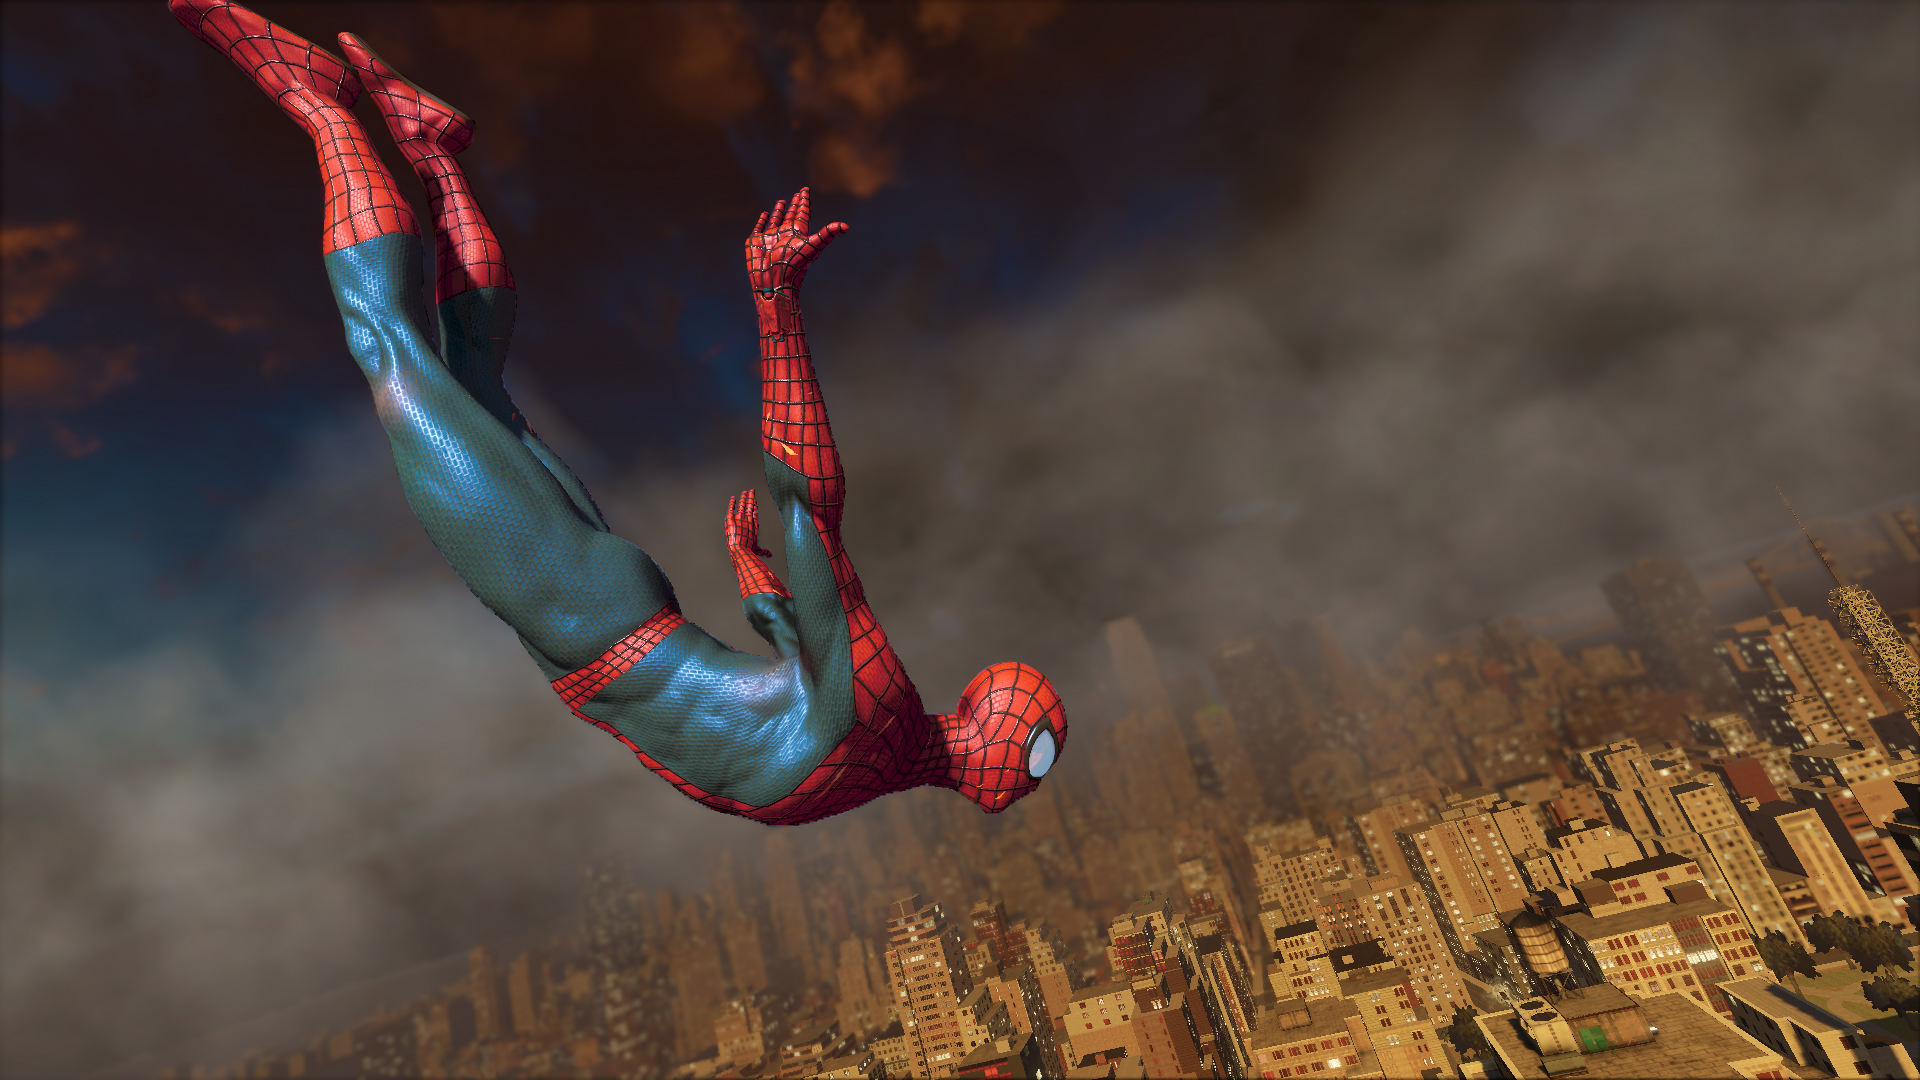 The Amazing Spider-Man 2 (Game) - YP